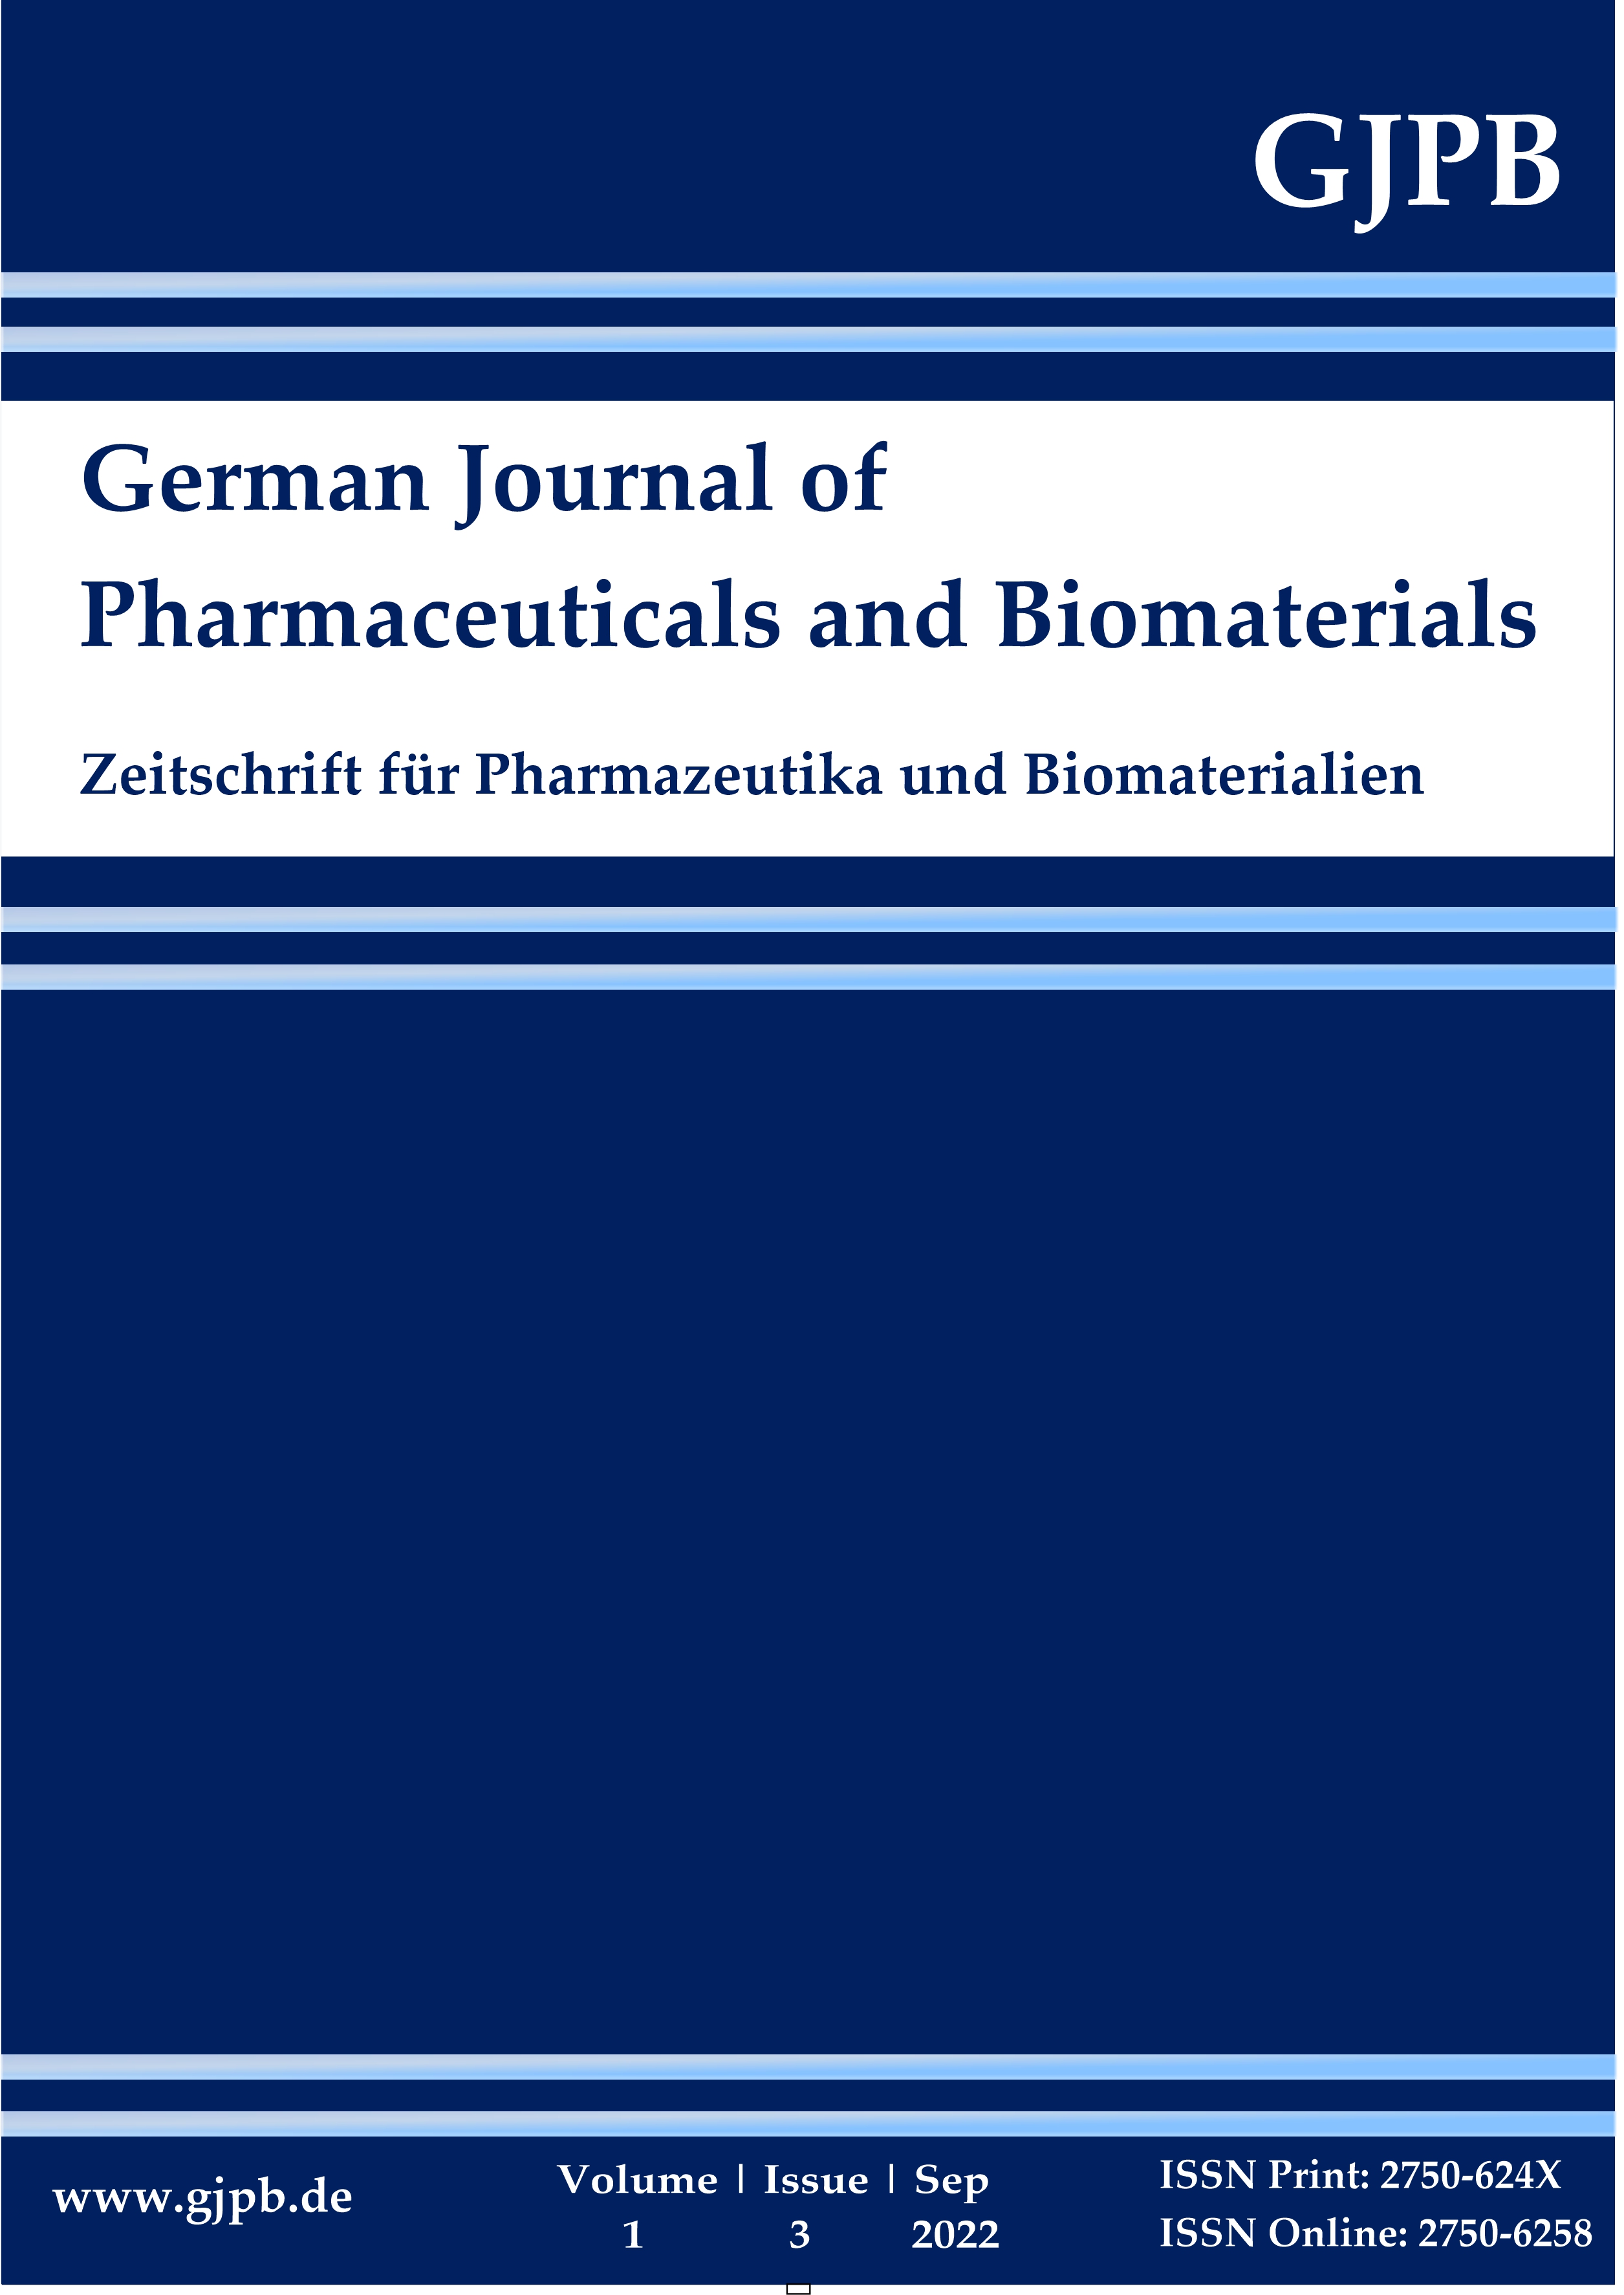 					View Vol. 1 No. 3 (2022): German Journal of Pharmaceuticals and Biomaterials
				